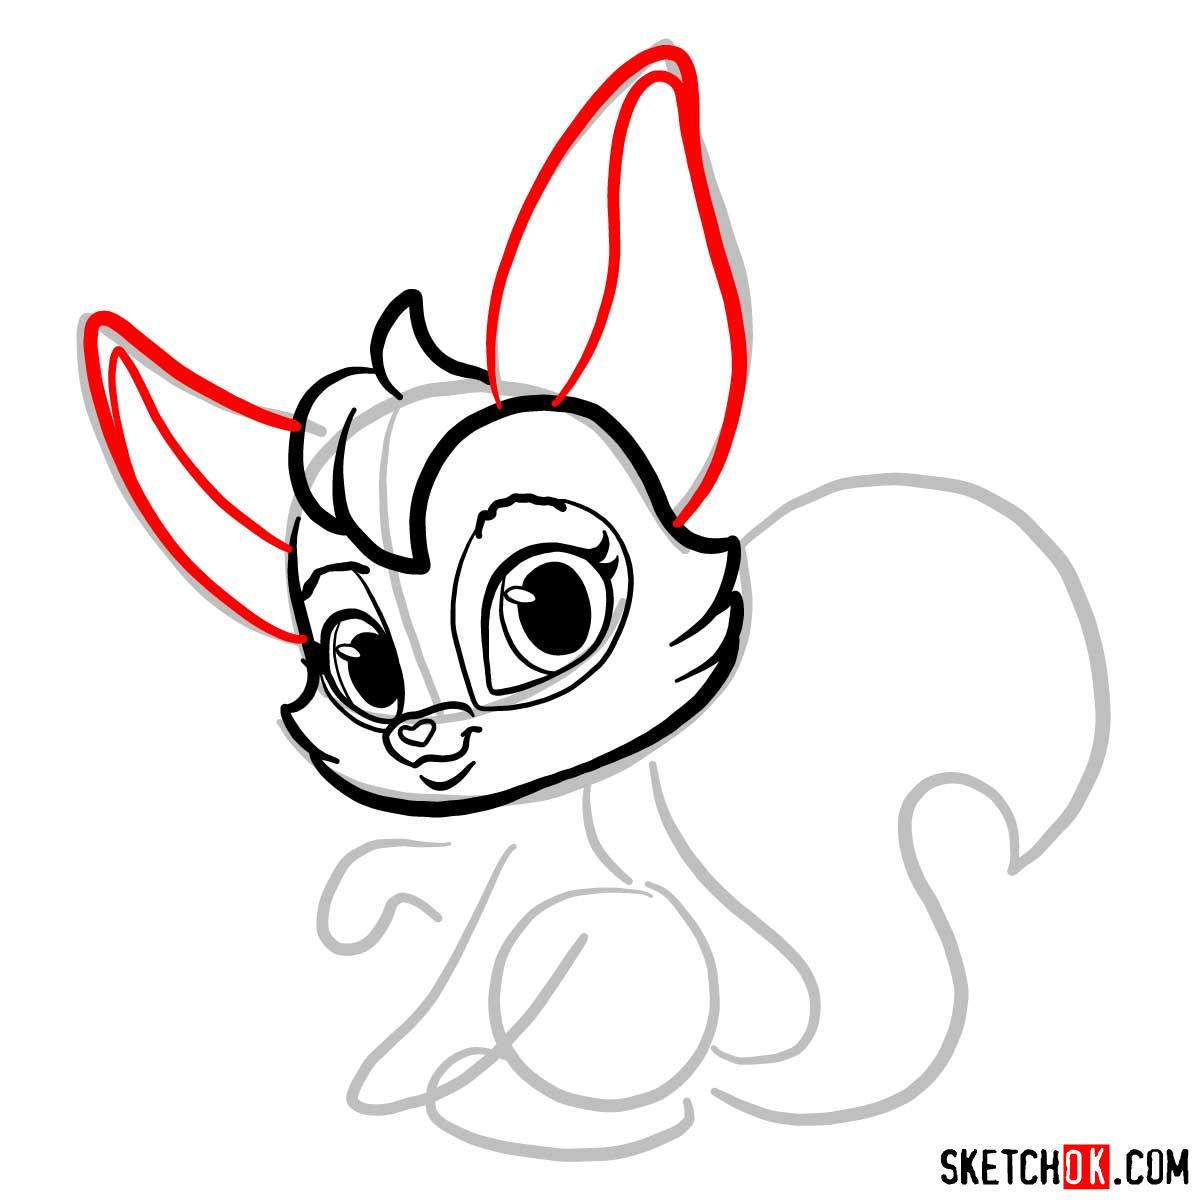 How to draw Parisa, a pet from Shimmer and Shine - step 04